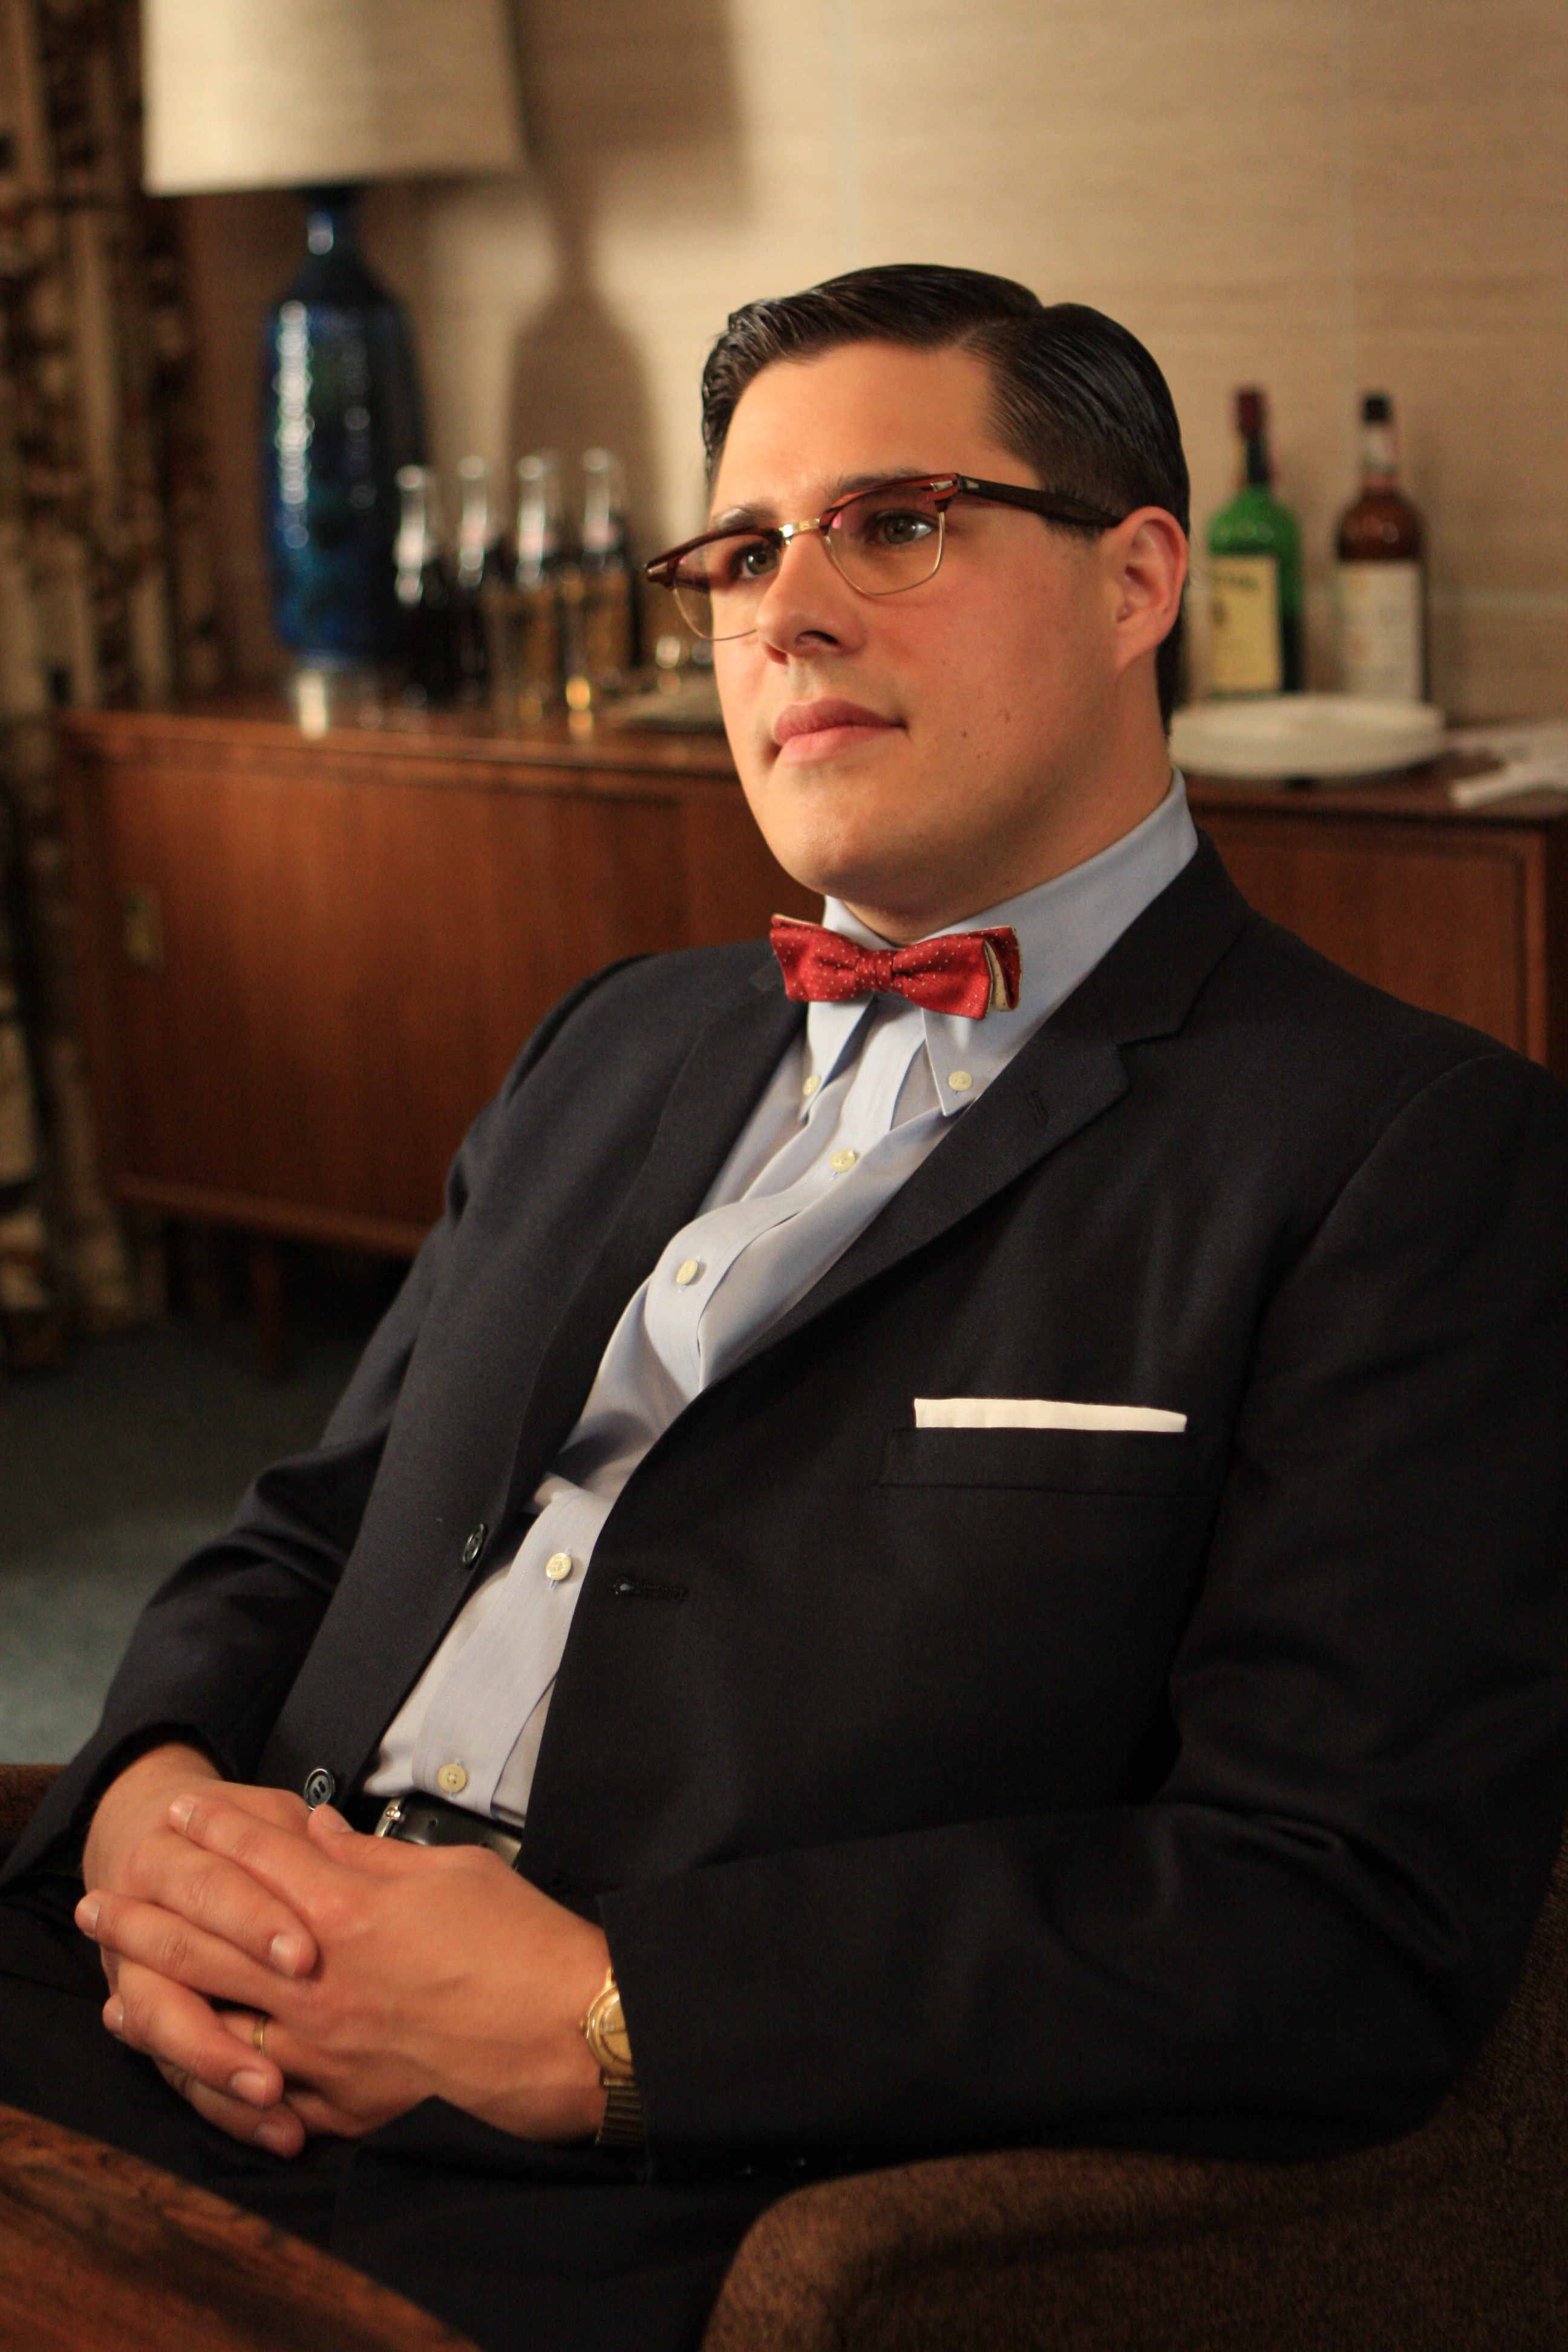 Interview with Rich Sommer aka Harry Crane, the television force behind SCDP.